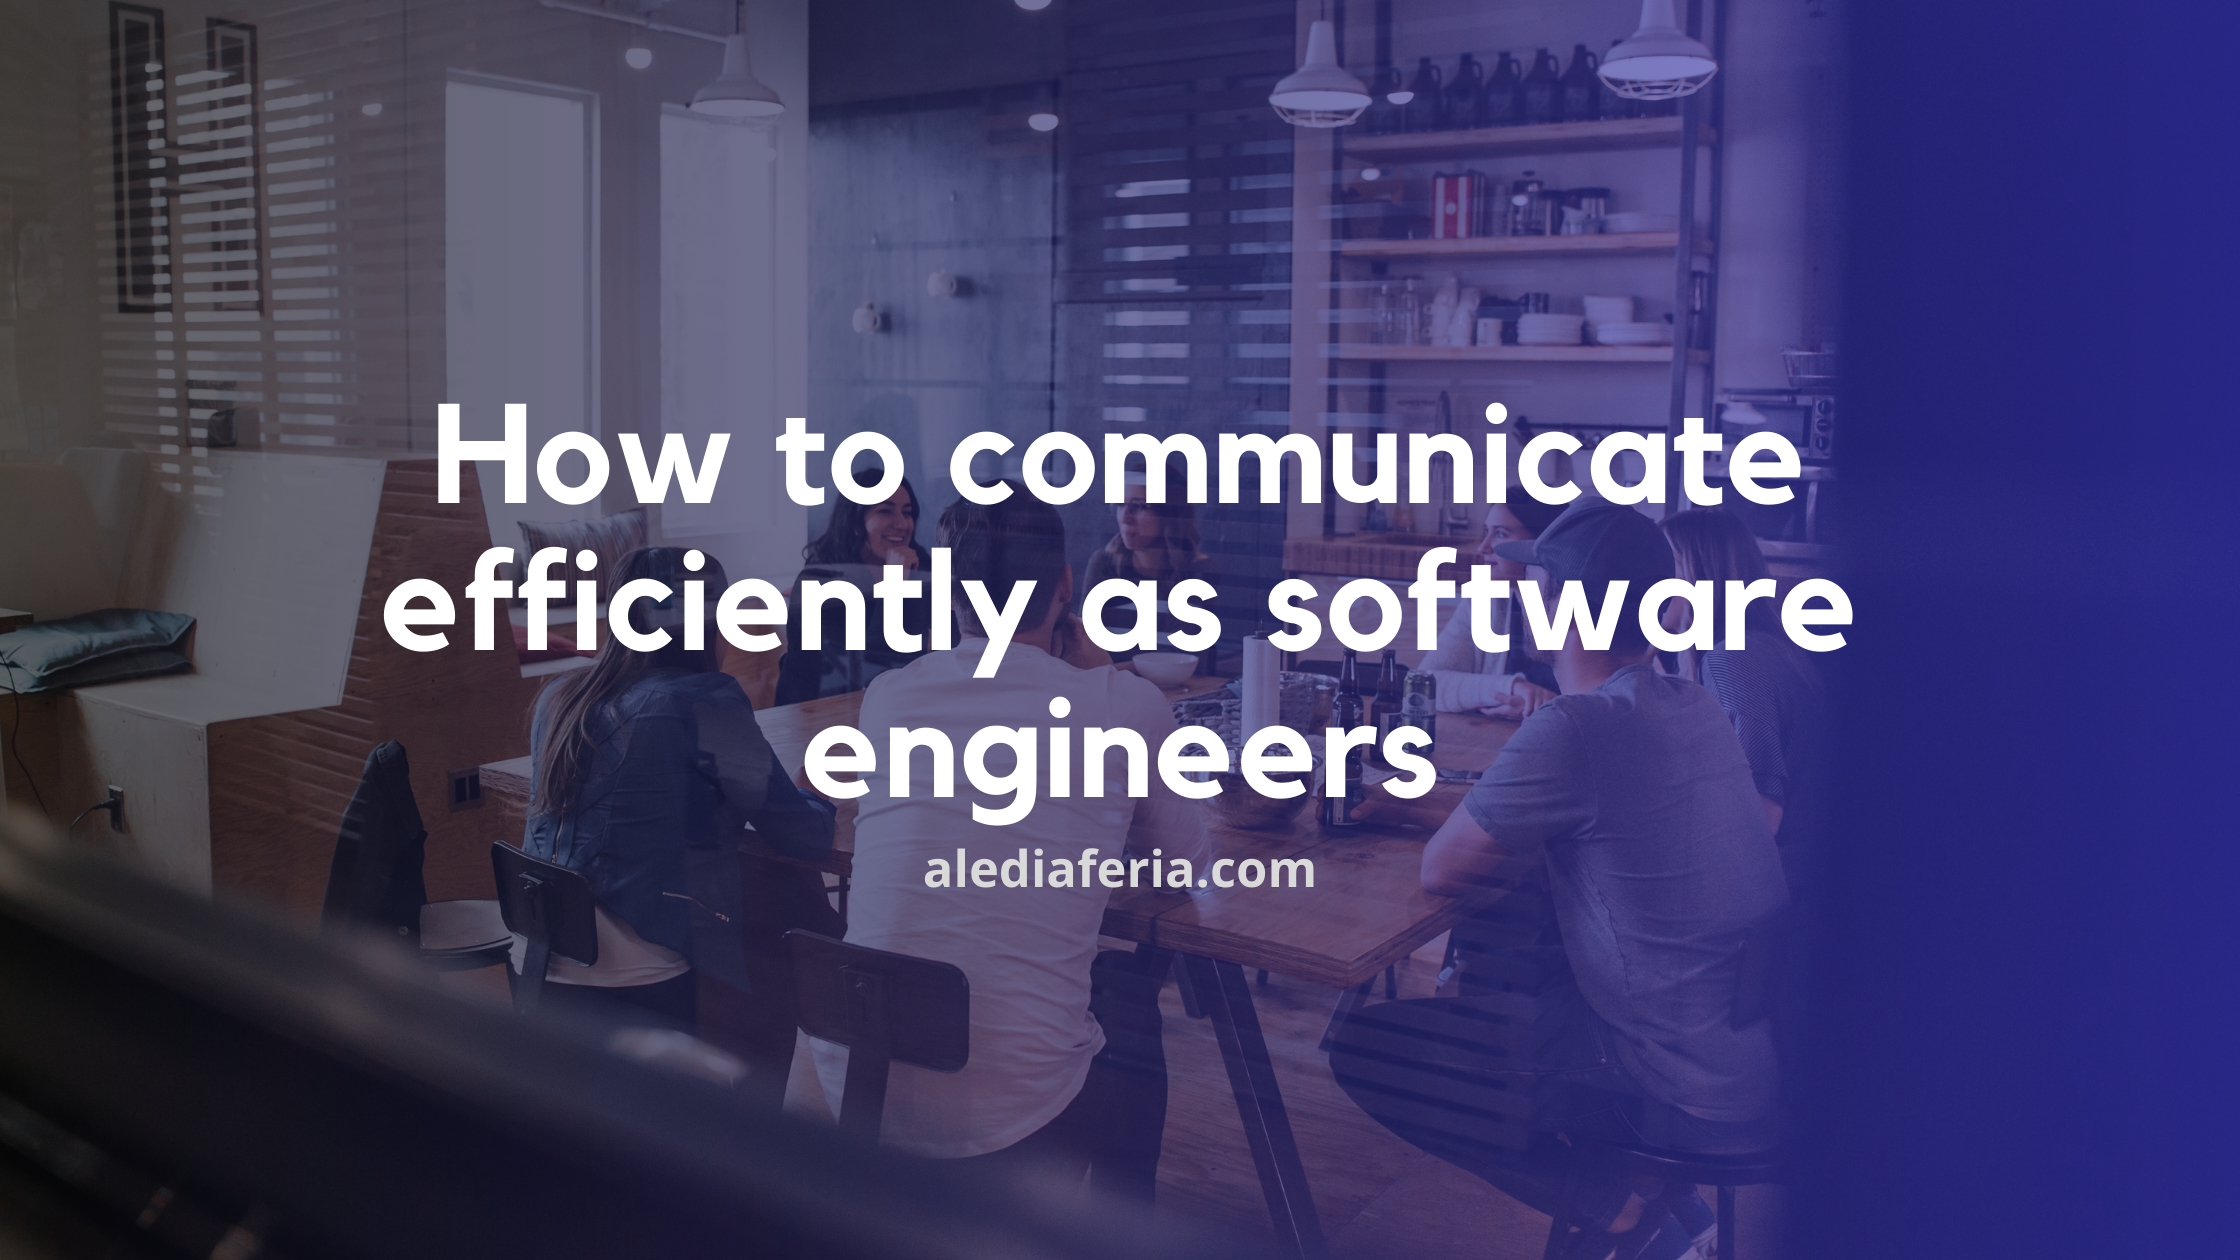 How to communicate efficiently as software engineers